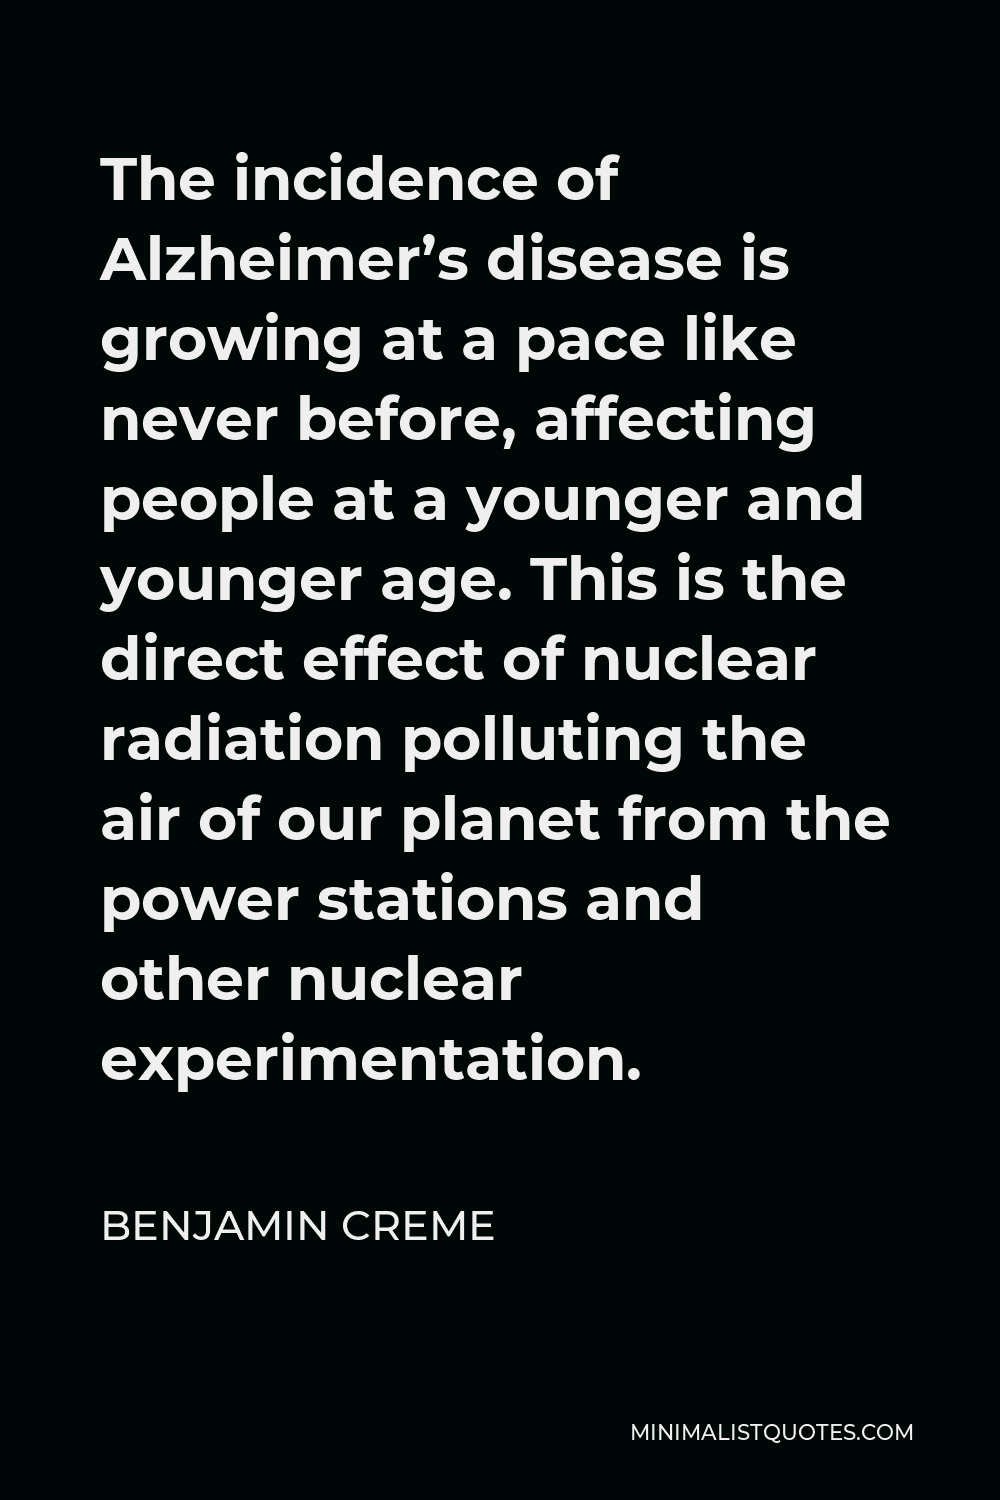 Benjamin Creme Quote - The incidence of Alzheimer’s disease is growing at a pace like never before, affecting people at a younger and younger age. This is the direct effect of nuclear radiation polluting the air of our planet from the power stations and other nuclear experimentation.